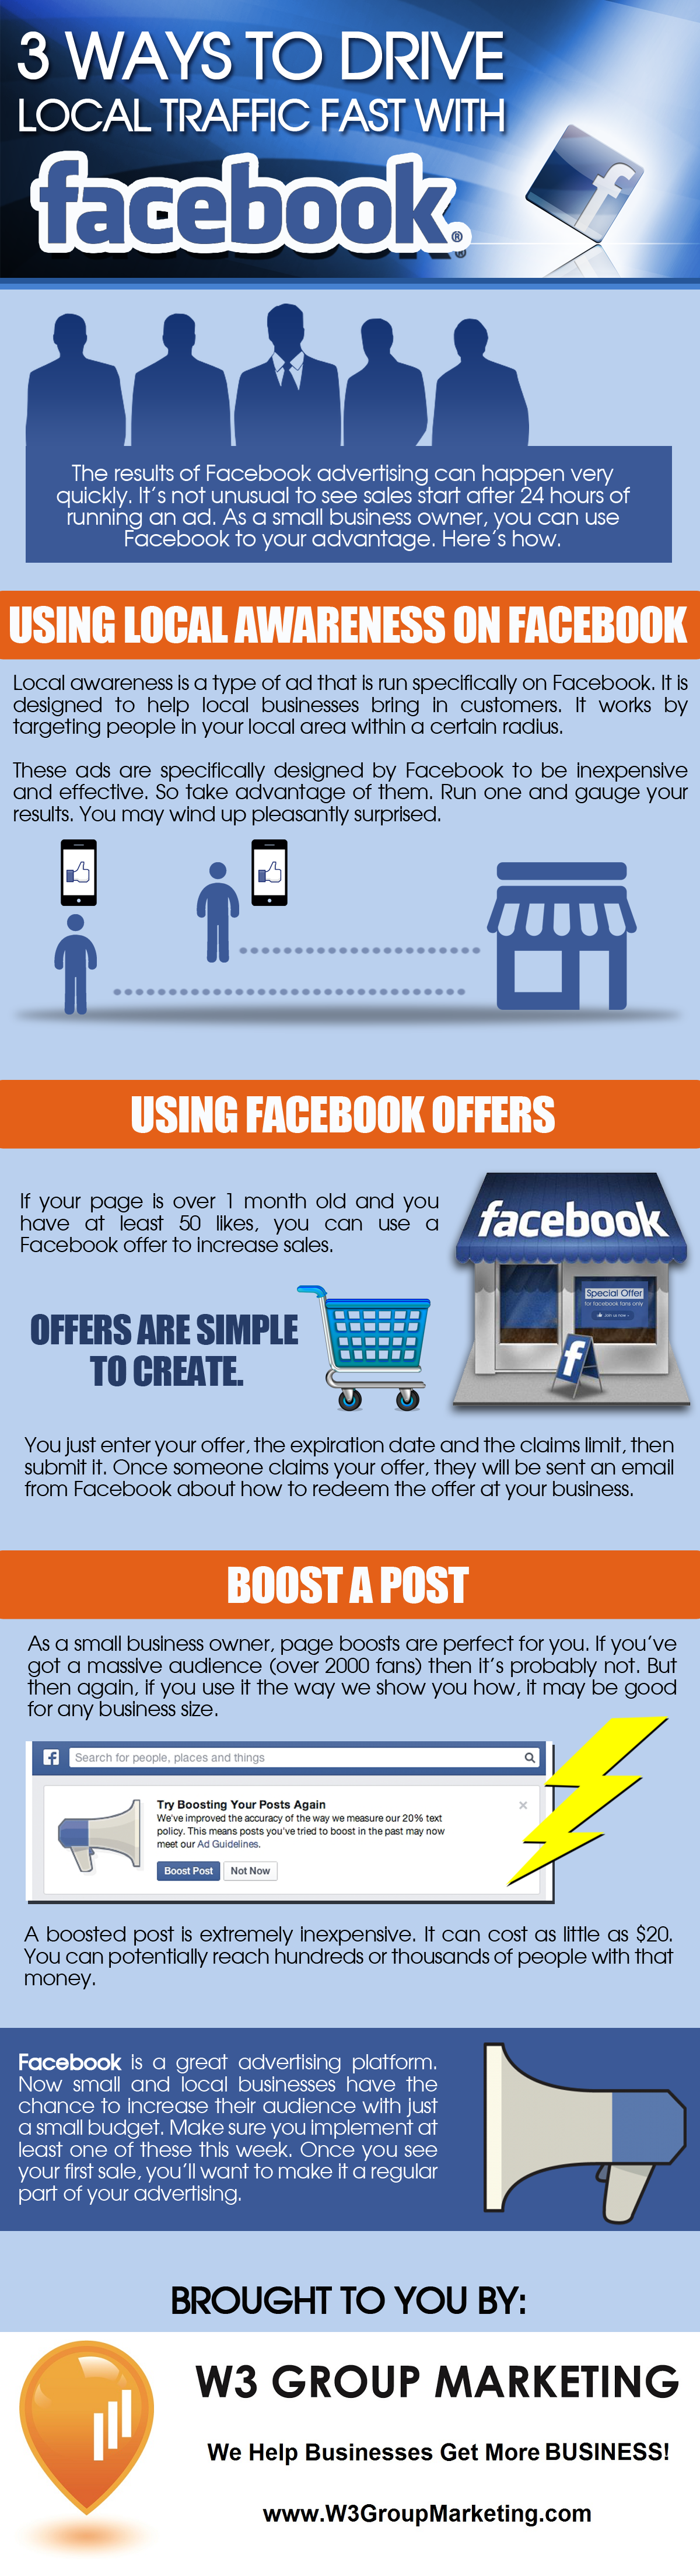 Infographic: Three Ways to Drive Local Traffic Fast with Facebook Advertising